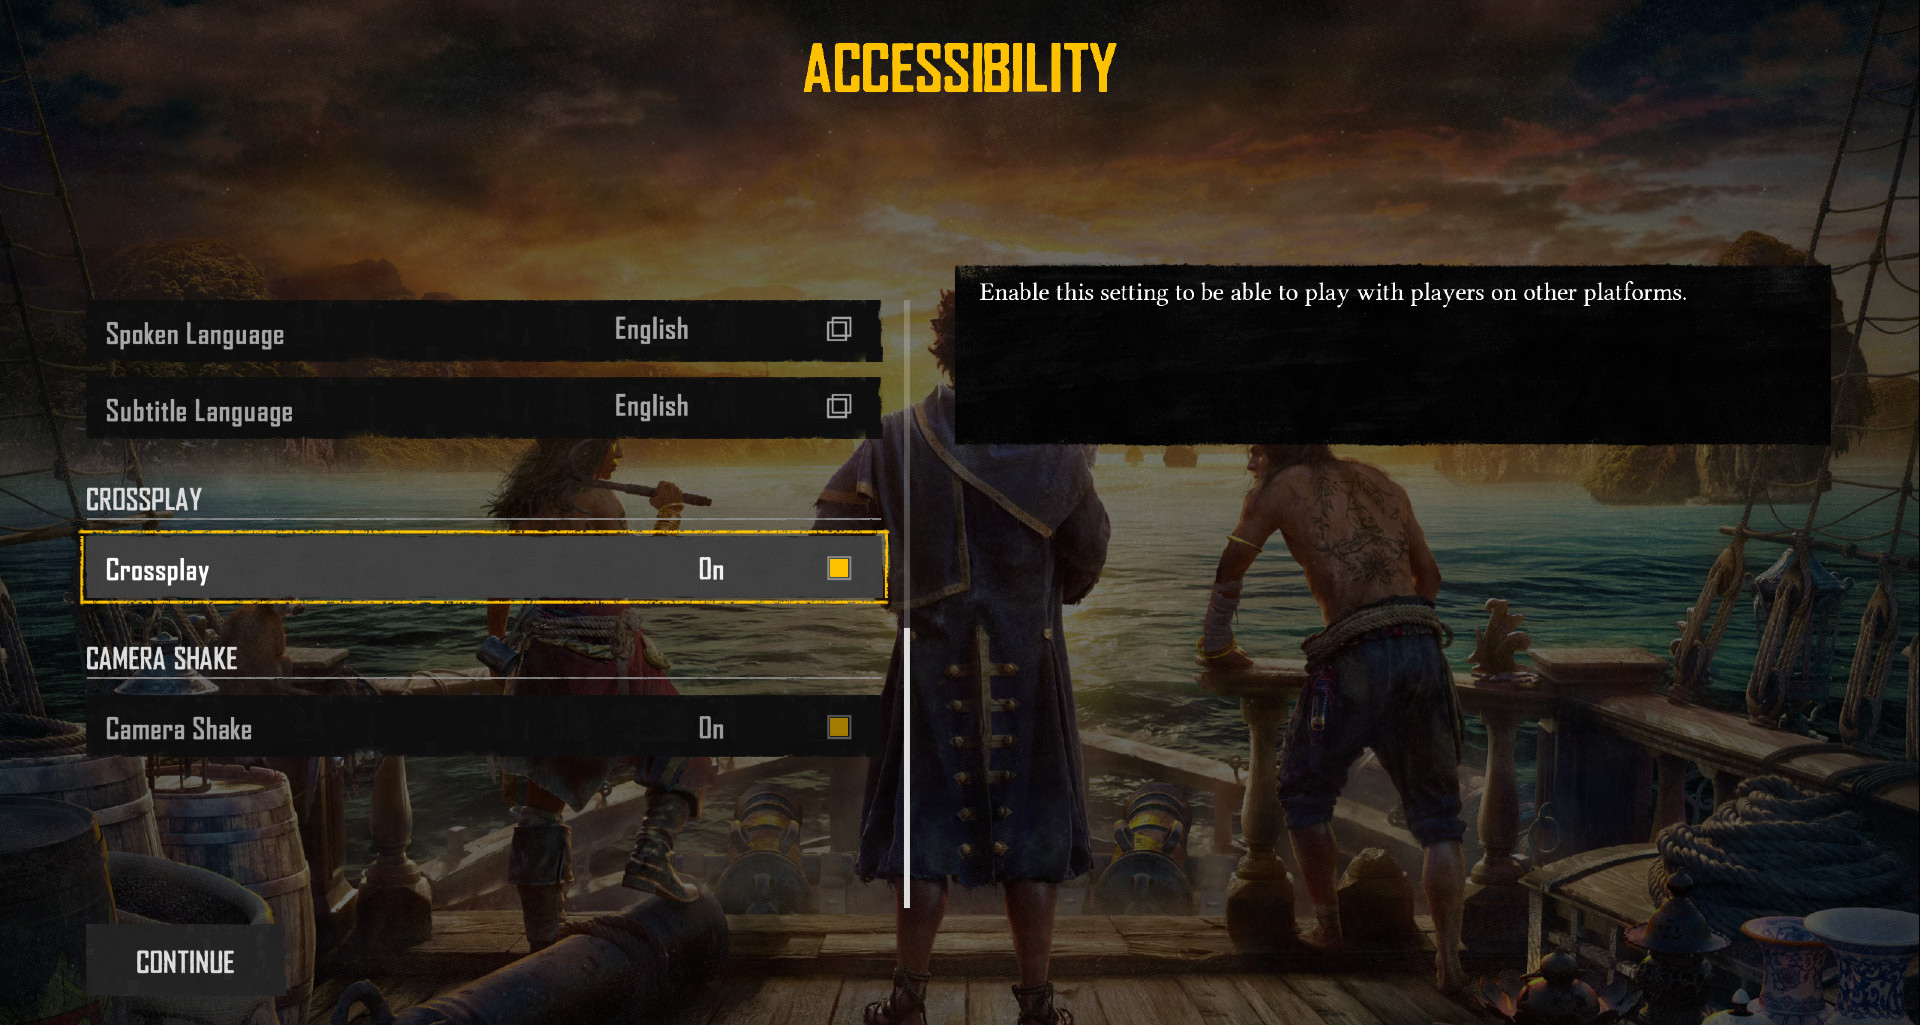 The accessibility menu in Skull and Bones.